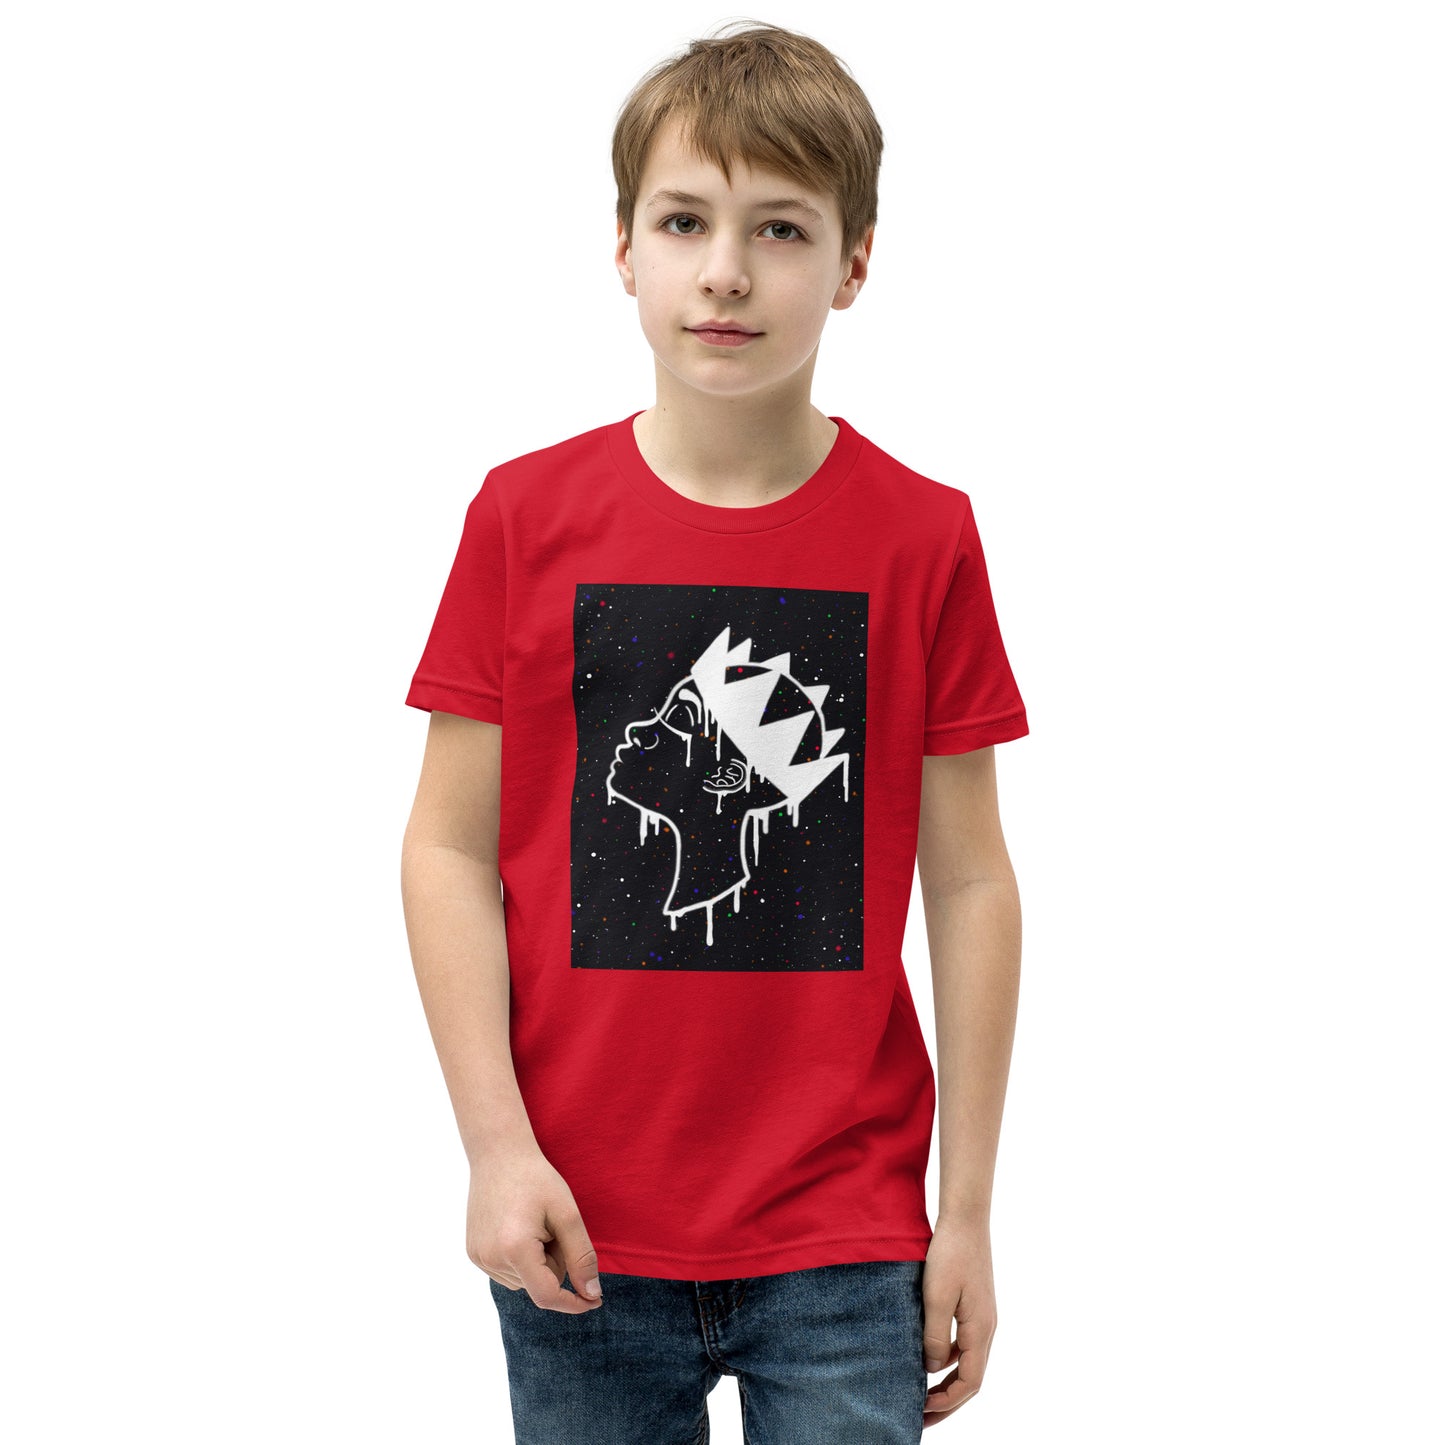 King of the Clouds Youth T-Shirt